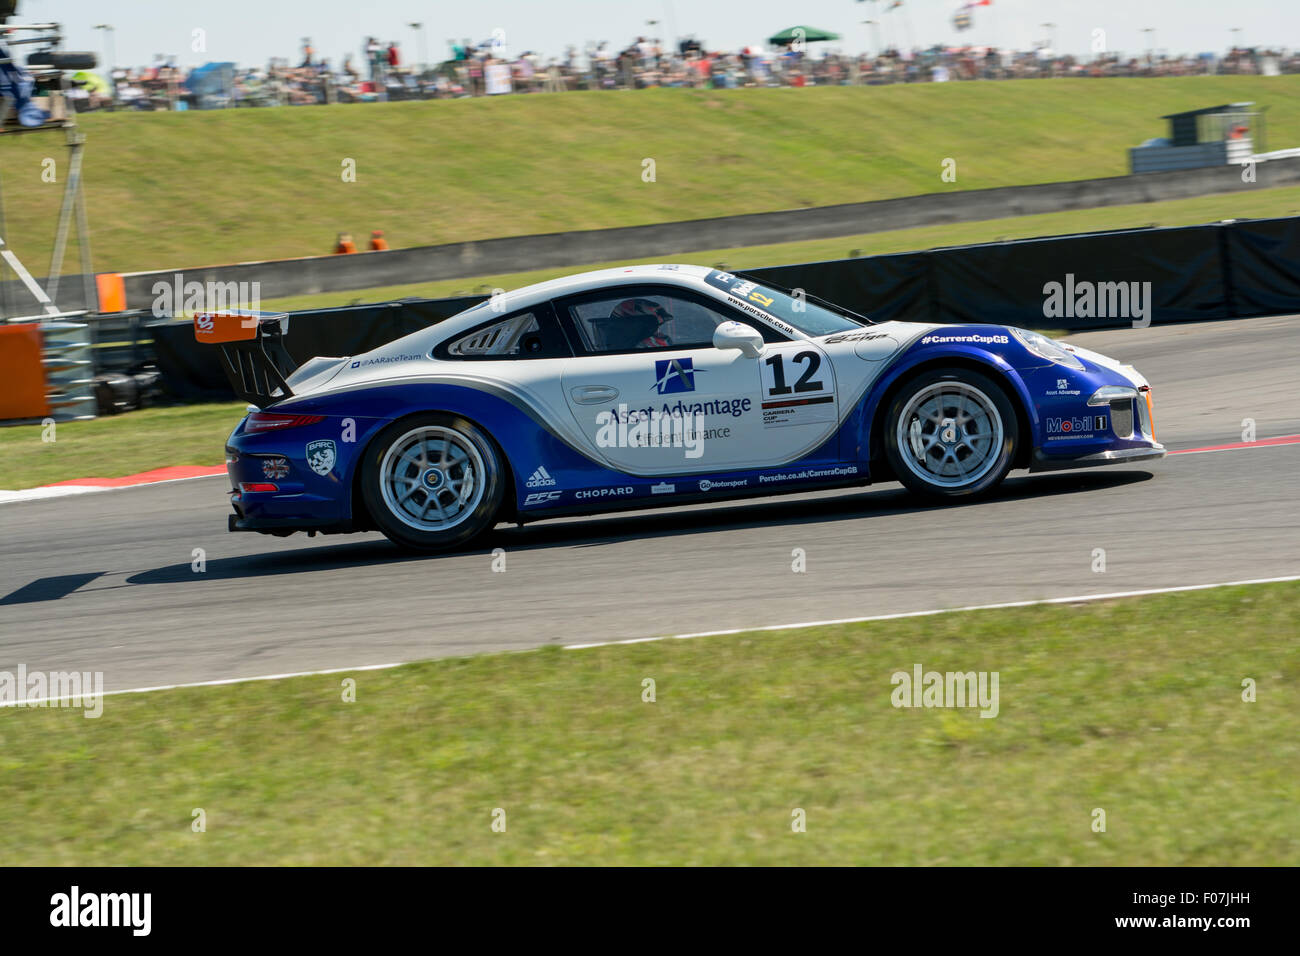 Norwich, Norfolk, UK. 9th Aug, 2015. Chris Dockerill from Essex and Credit4Cars Porsche 911 GT3 Cup drives during the Porsche Carrera Cup GB at Snetterton Circuit on August 9, 2015 in NORWICH, NORFOLK, UNITED KINGDOM Credit:  Gergo Toth/Alamy Live News Stock Photo